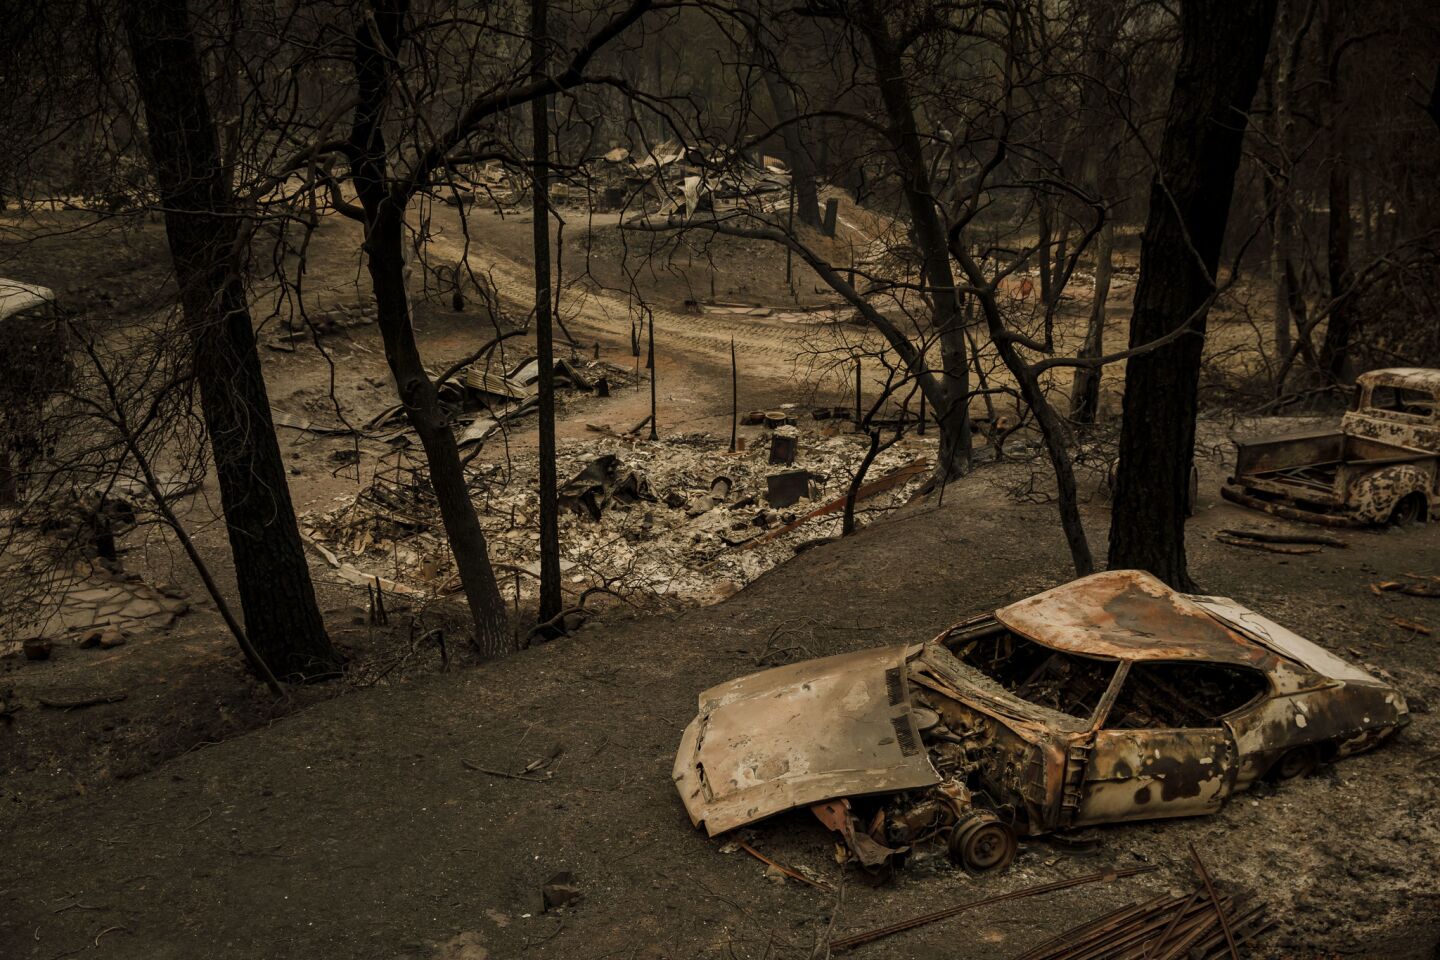 The Carr fire swept through and destroyed property and structures in Shasta, Calif.